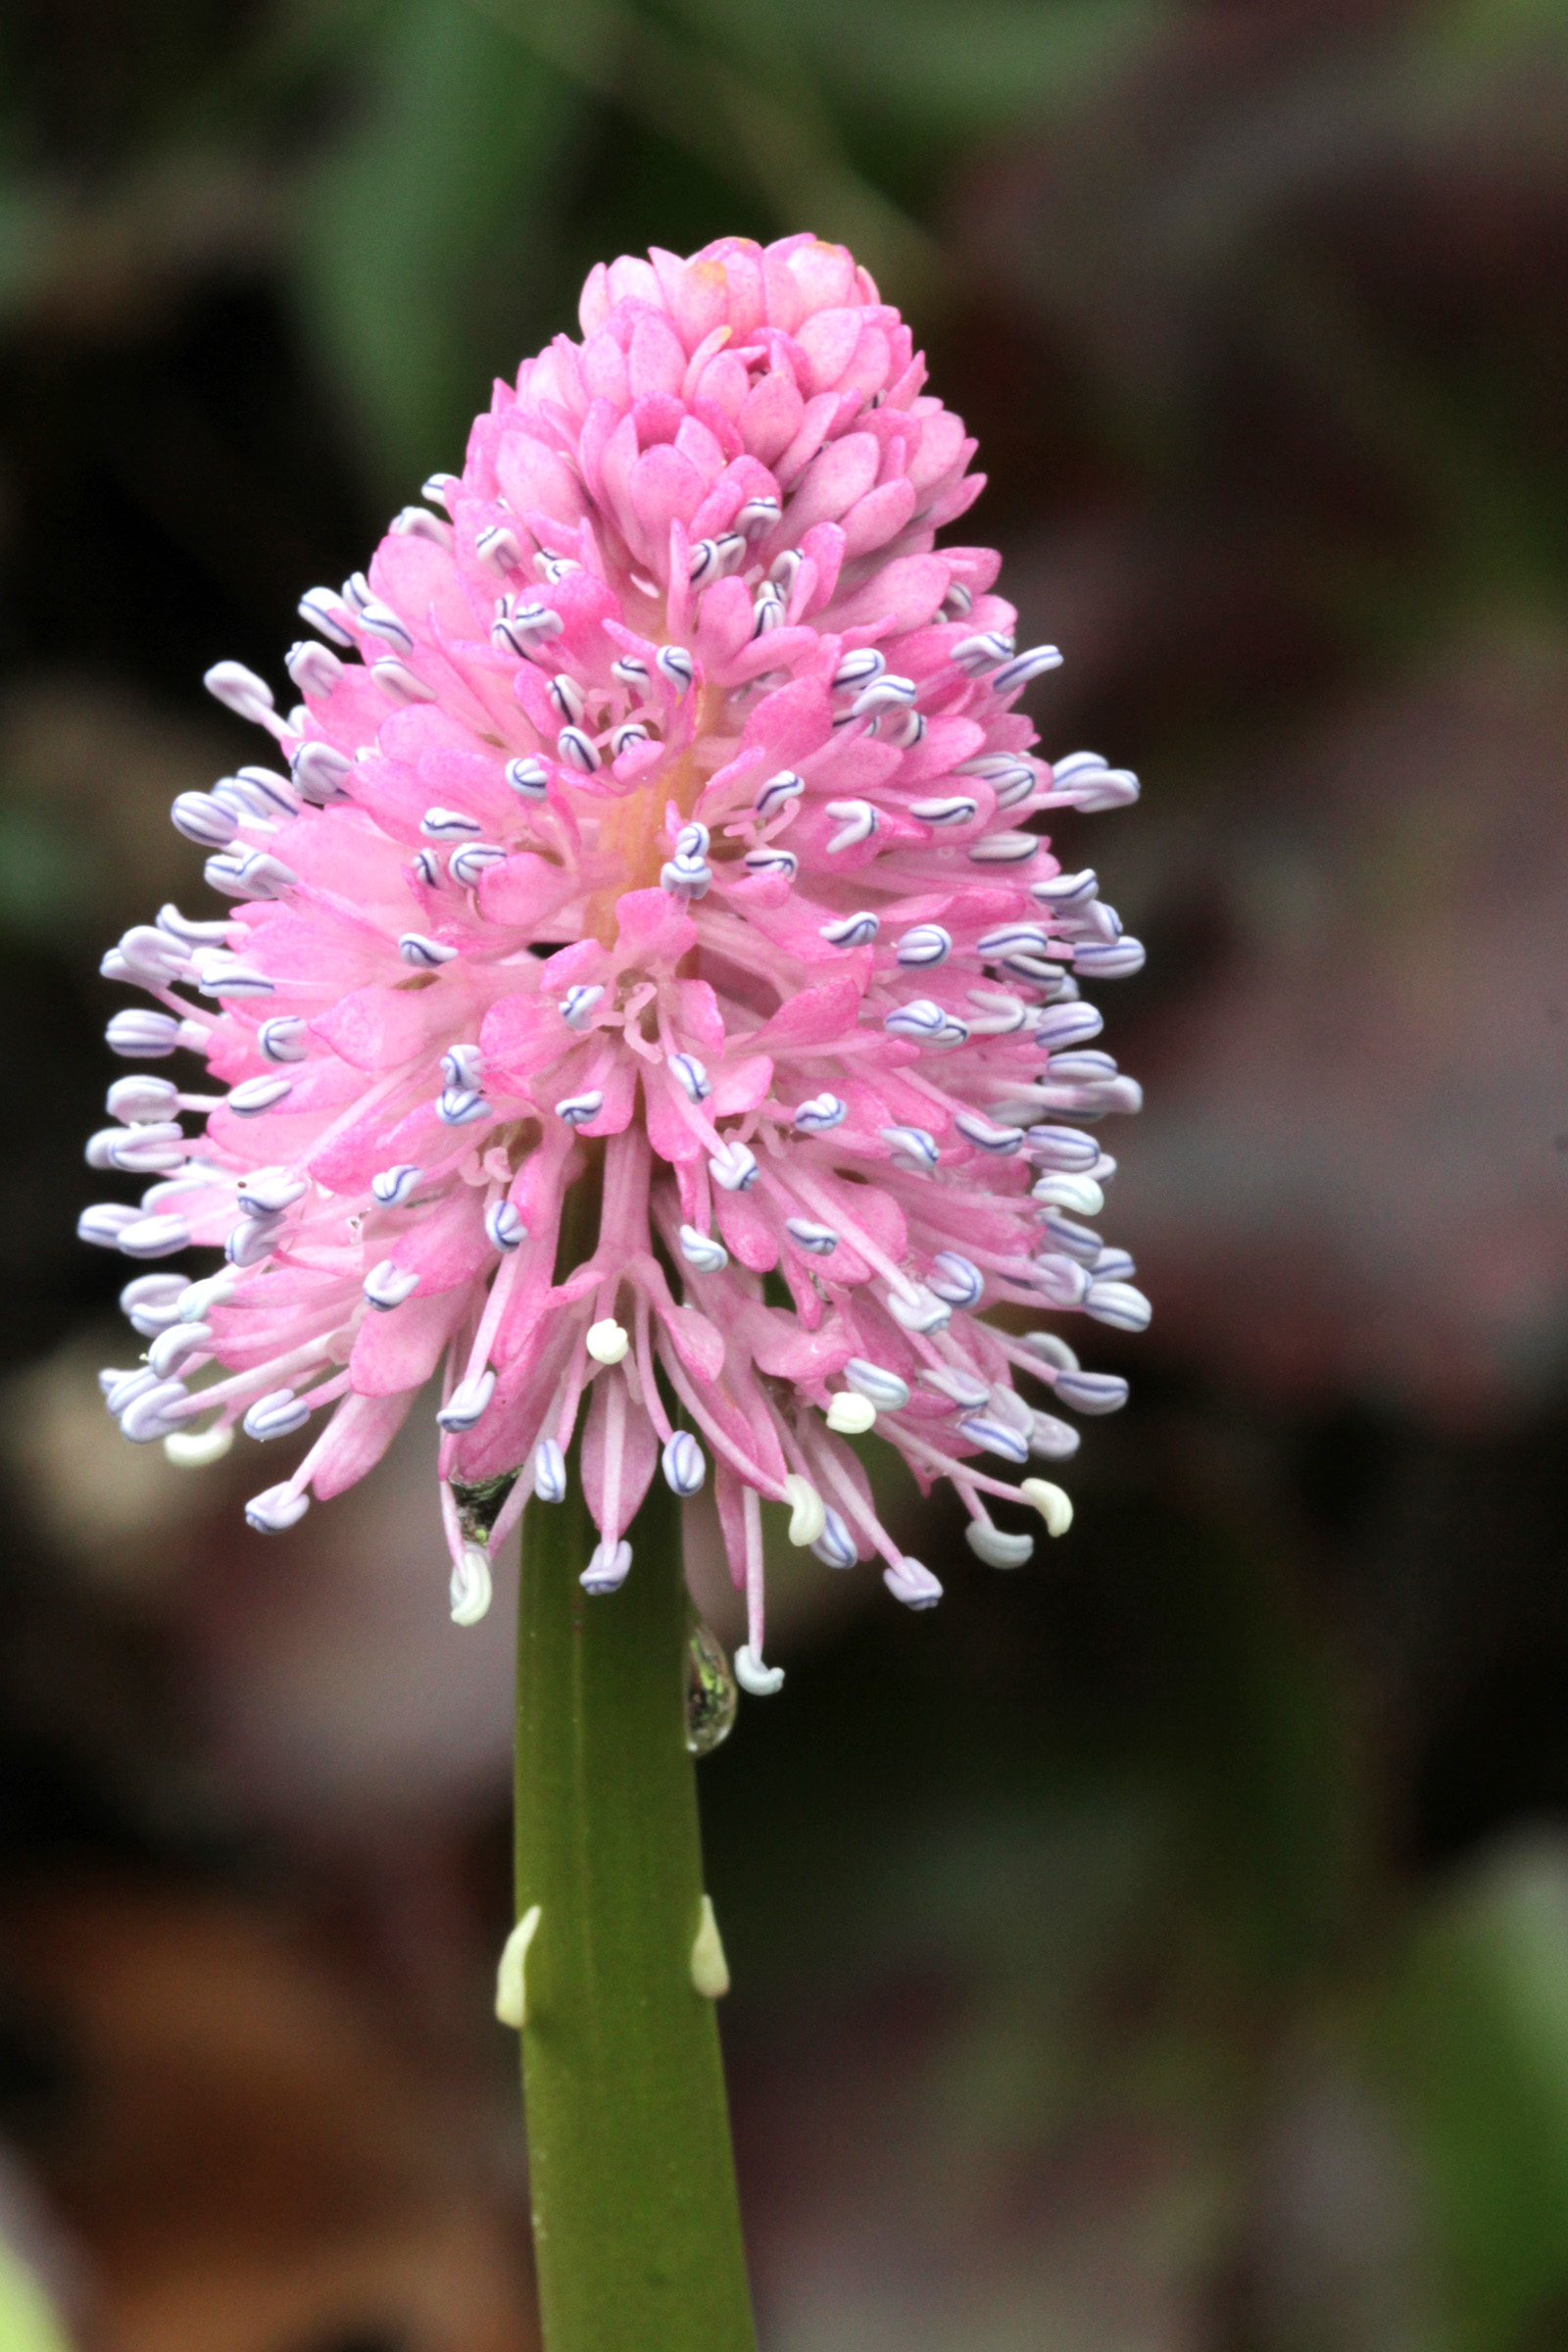 The Scientific Name is Helonias bullata. You will likely hear them called Swamp Pink. This picture shows the Inflorescence is a showy cone-shaped raceme at the top of a tall, smooth, scape bearing small, light-colored scale-like bracts. of Helonias bullata